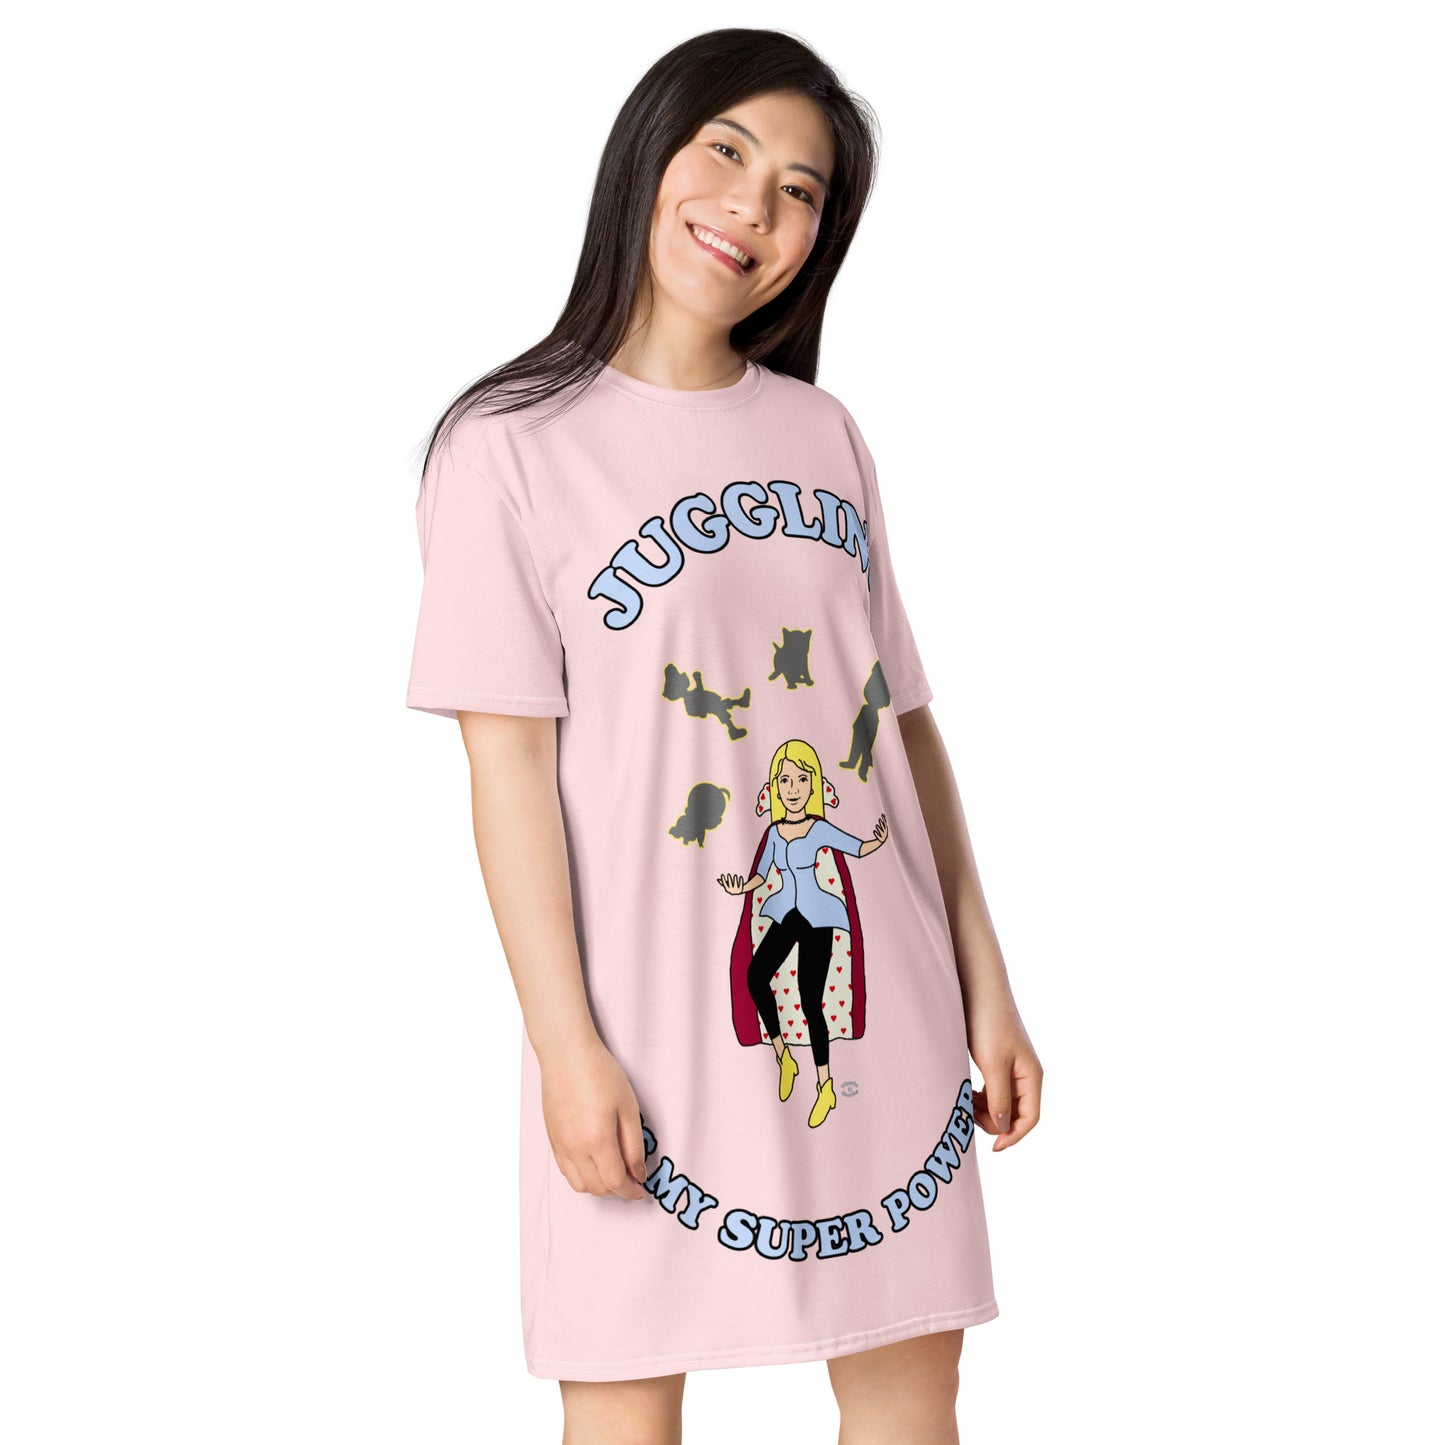 A women wearing a short sleeve tshirt dress which has on the front a cartoon women in a cape juggling her family like a jester and the text Juggling Is My Super Power - right front - light pink